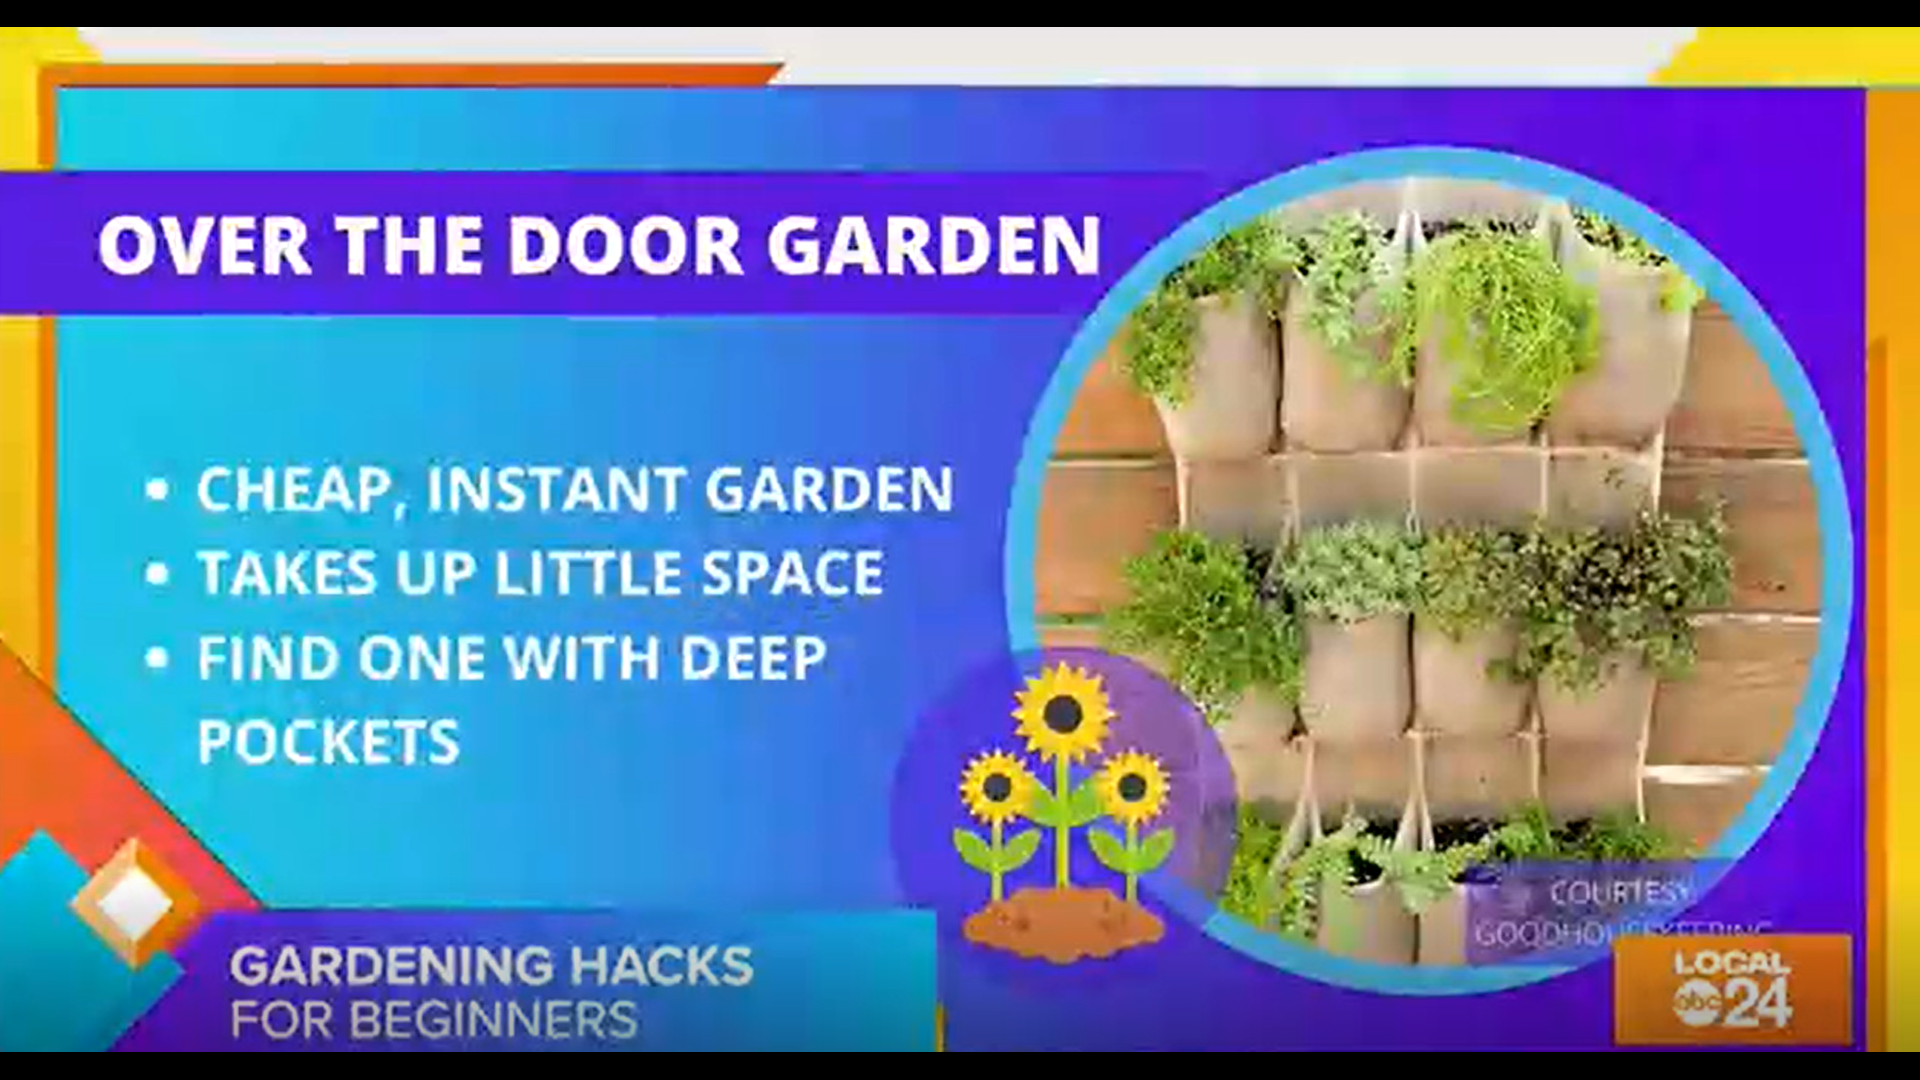 Whether you're a beginner gardener or you just so happen to have a green thumb, join Sydney Neely as we take a look at these easy hacks! They may surprise you. :)